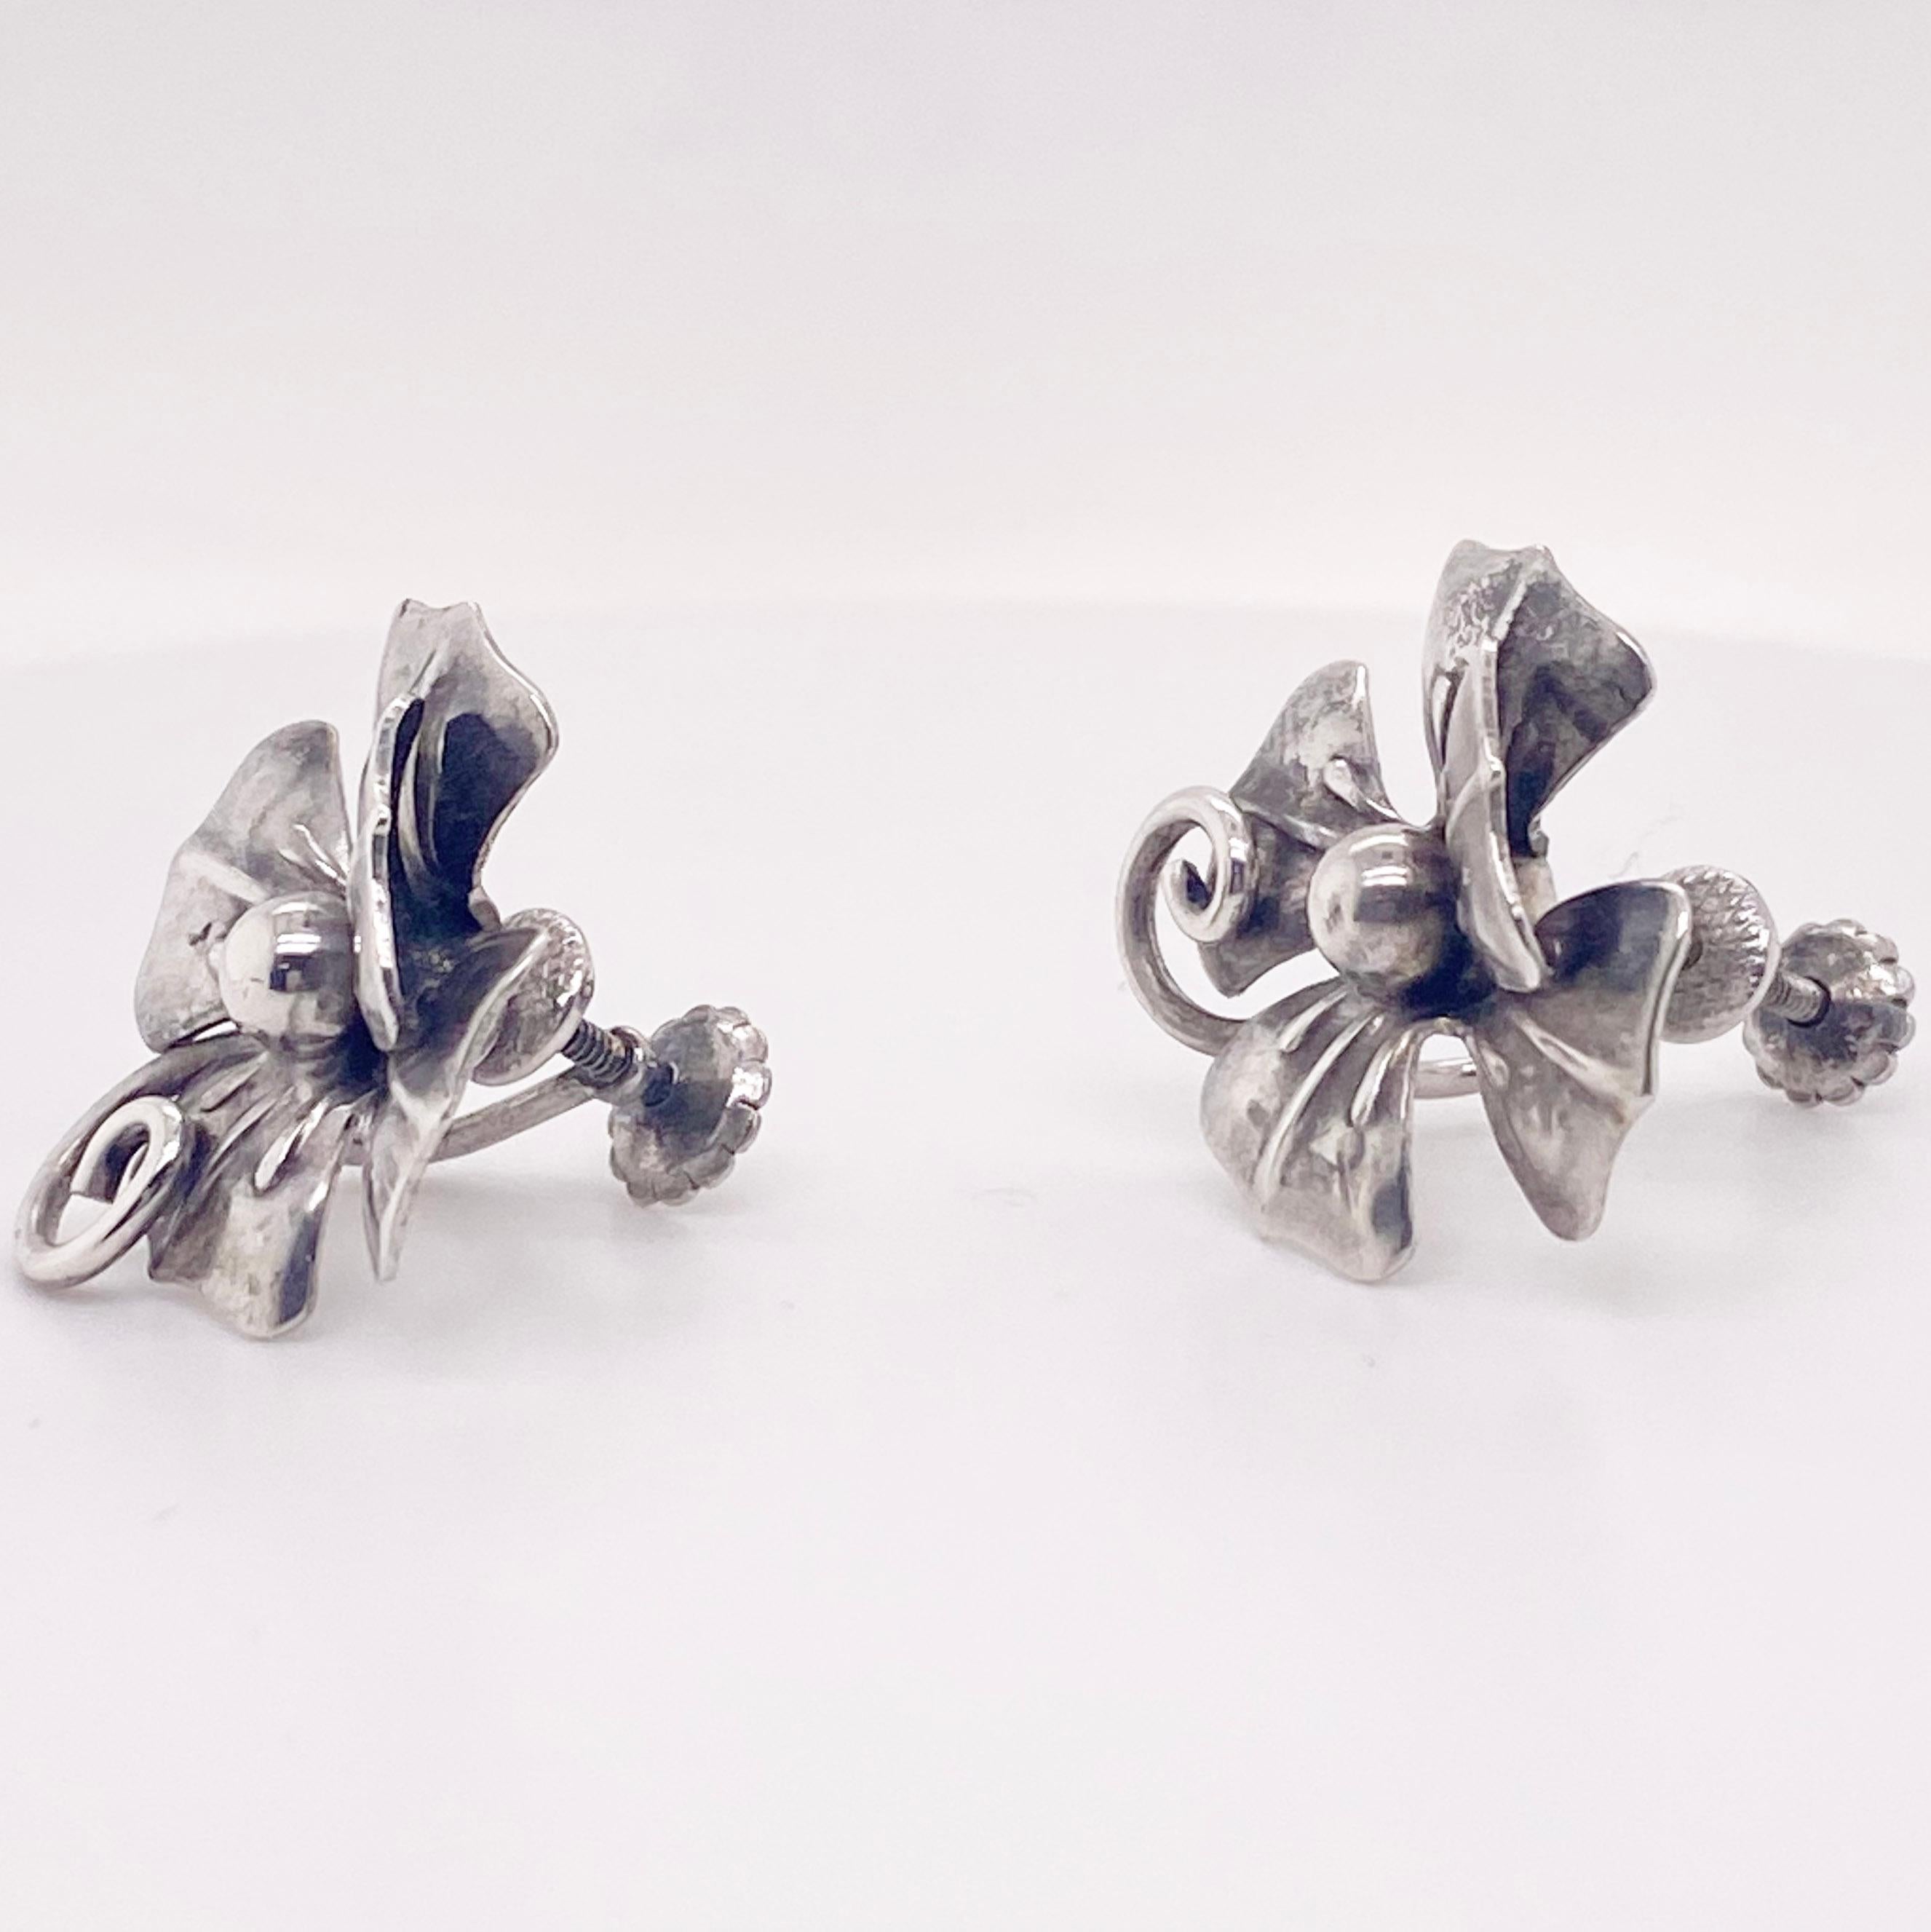 These vintage earrings from the Victorian era are perfect for non-pierced ears. The earrings have a beautiful floral design. The details for these gorgeous earrings are listed below:
1 Set
Metal Quality: Sterling SIlver
Earring Type: Clip On